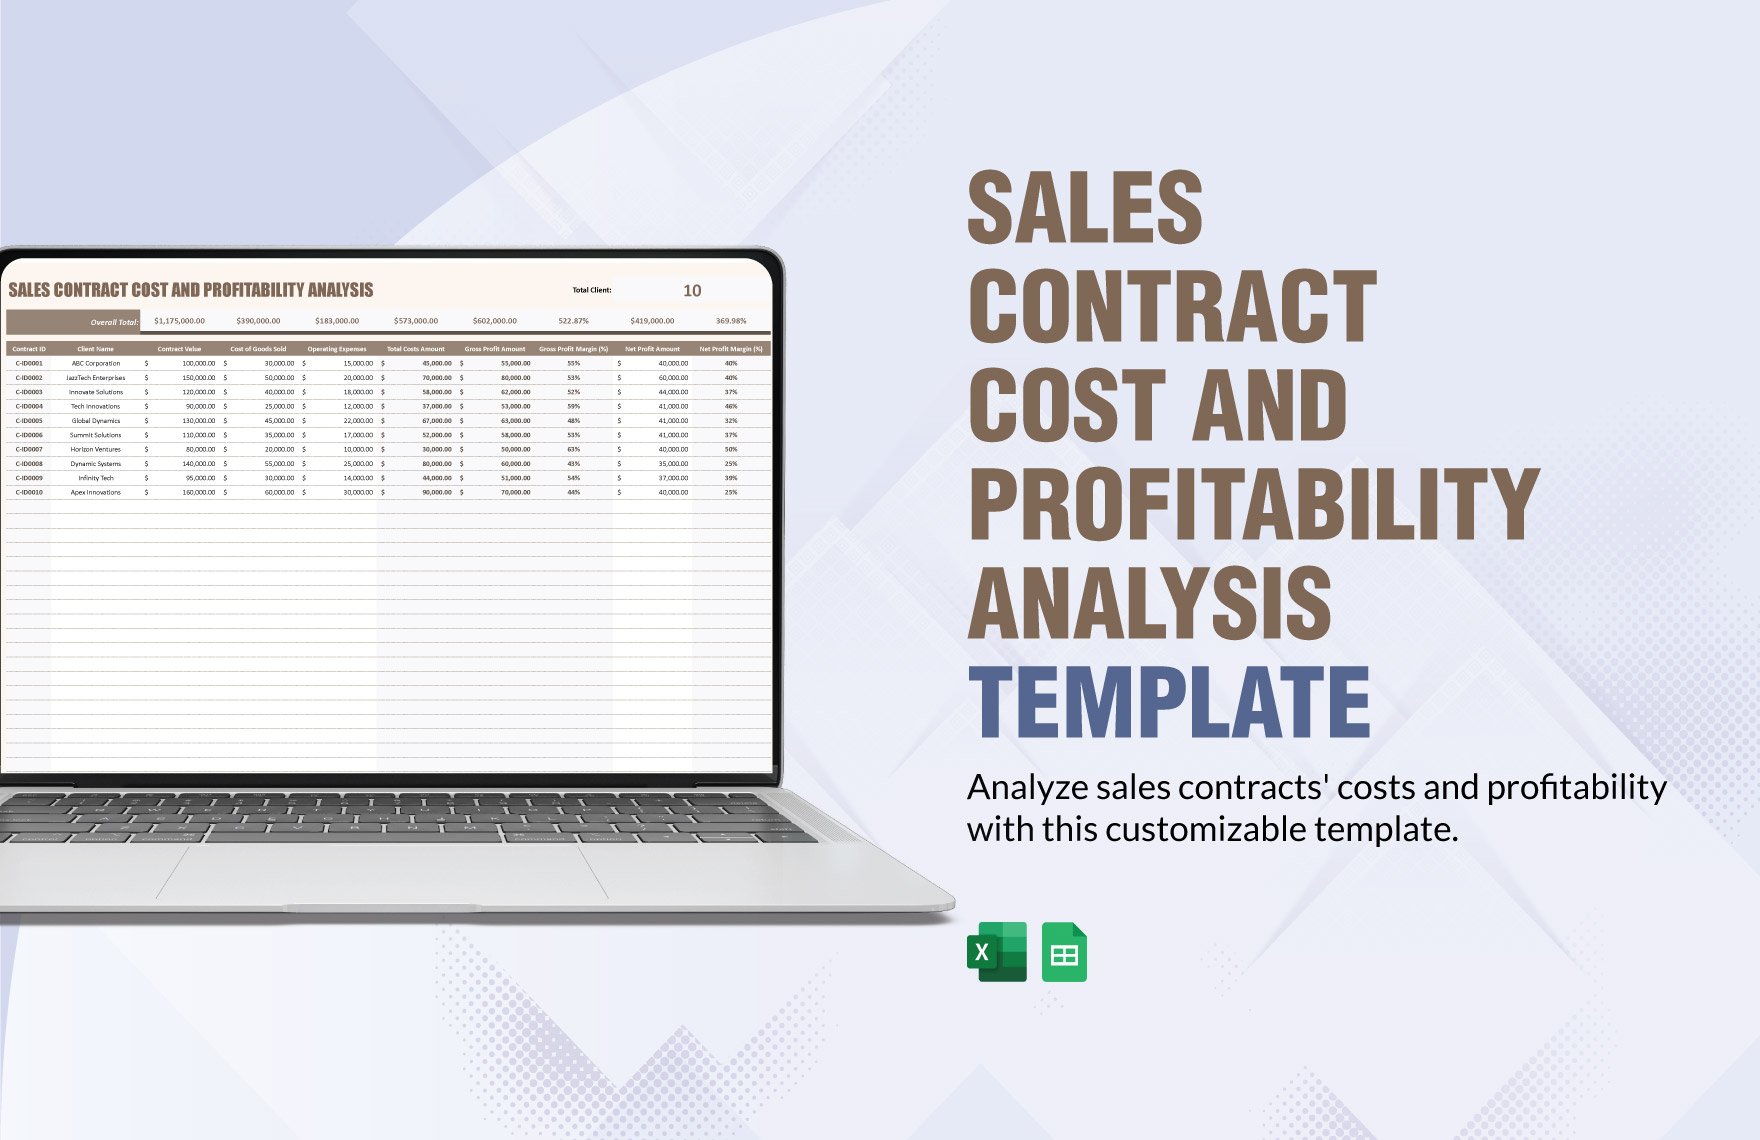 Sales Contract Cost and Profitability Analysis Template in Excel, Google Sheets